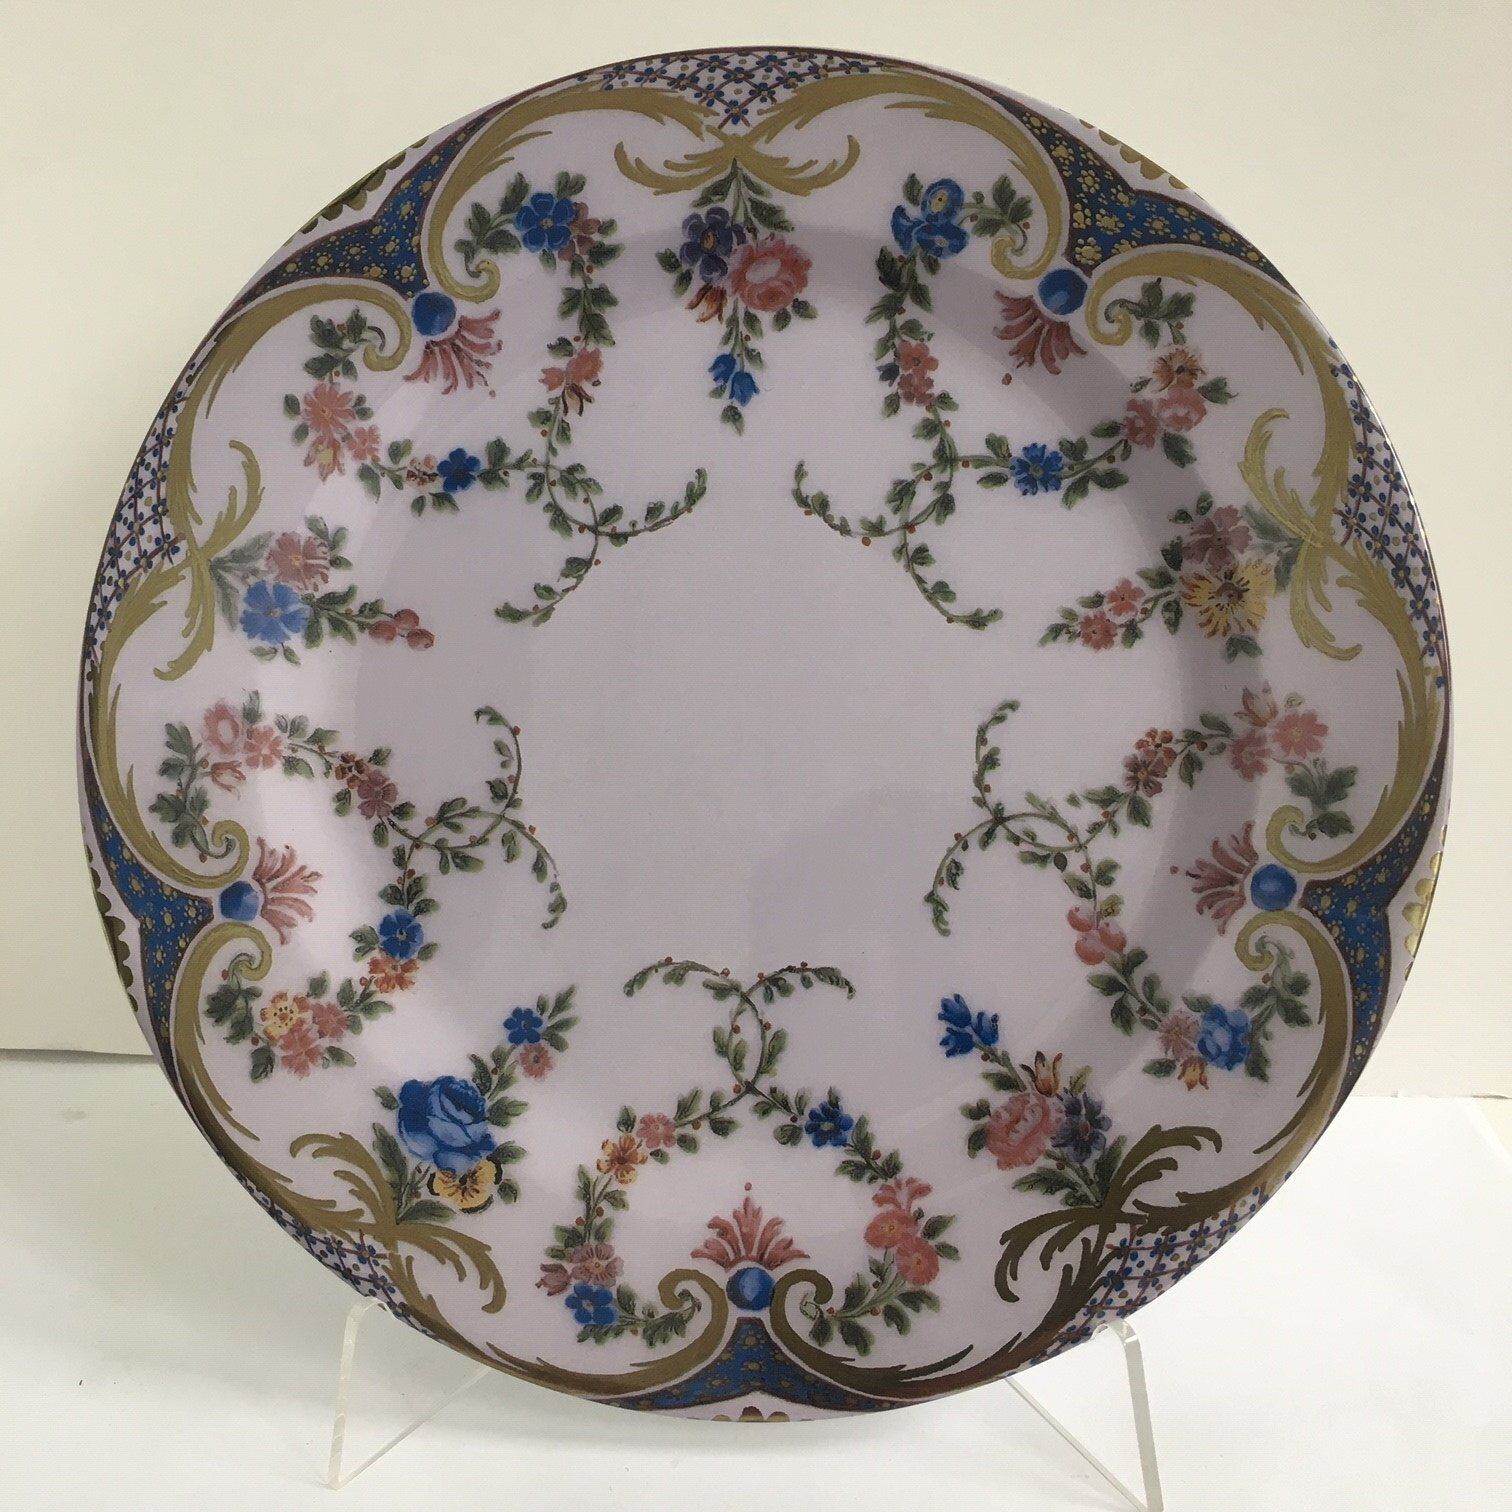 Tin Plate: Wallace Collection - Garlands